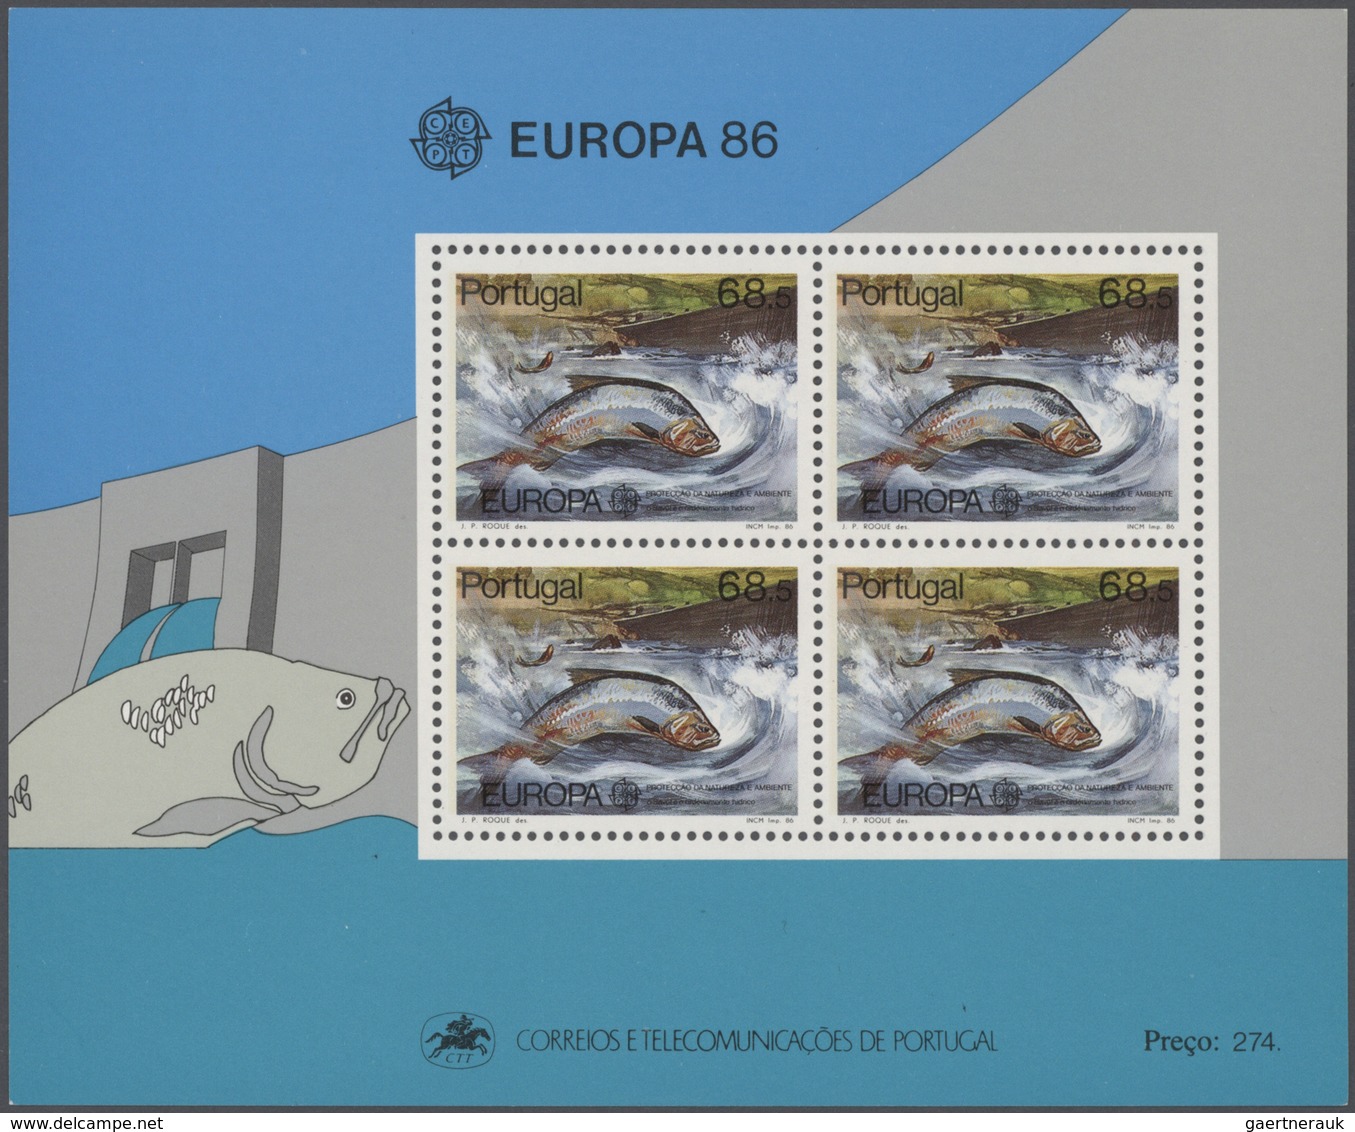 27790 Portugal: 1977/1998, huge stock of the blocks of the Europa issues of Portugal, Madeira and Azores.